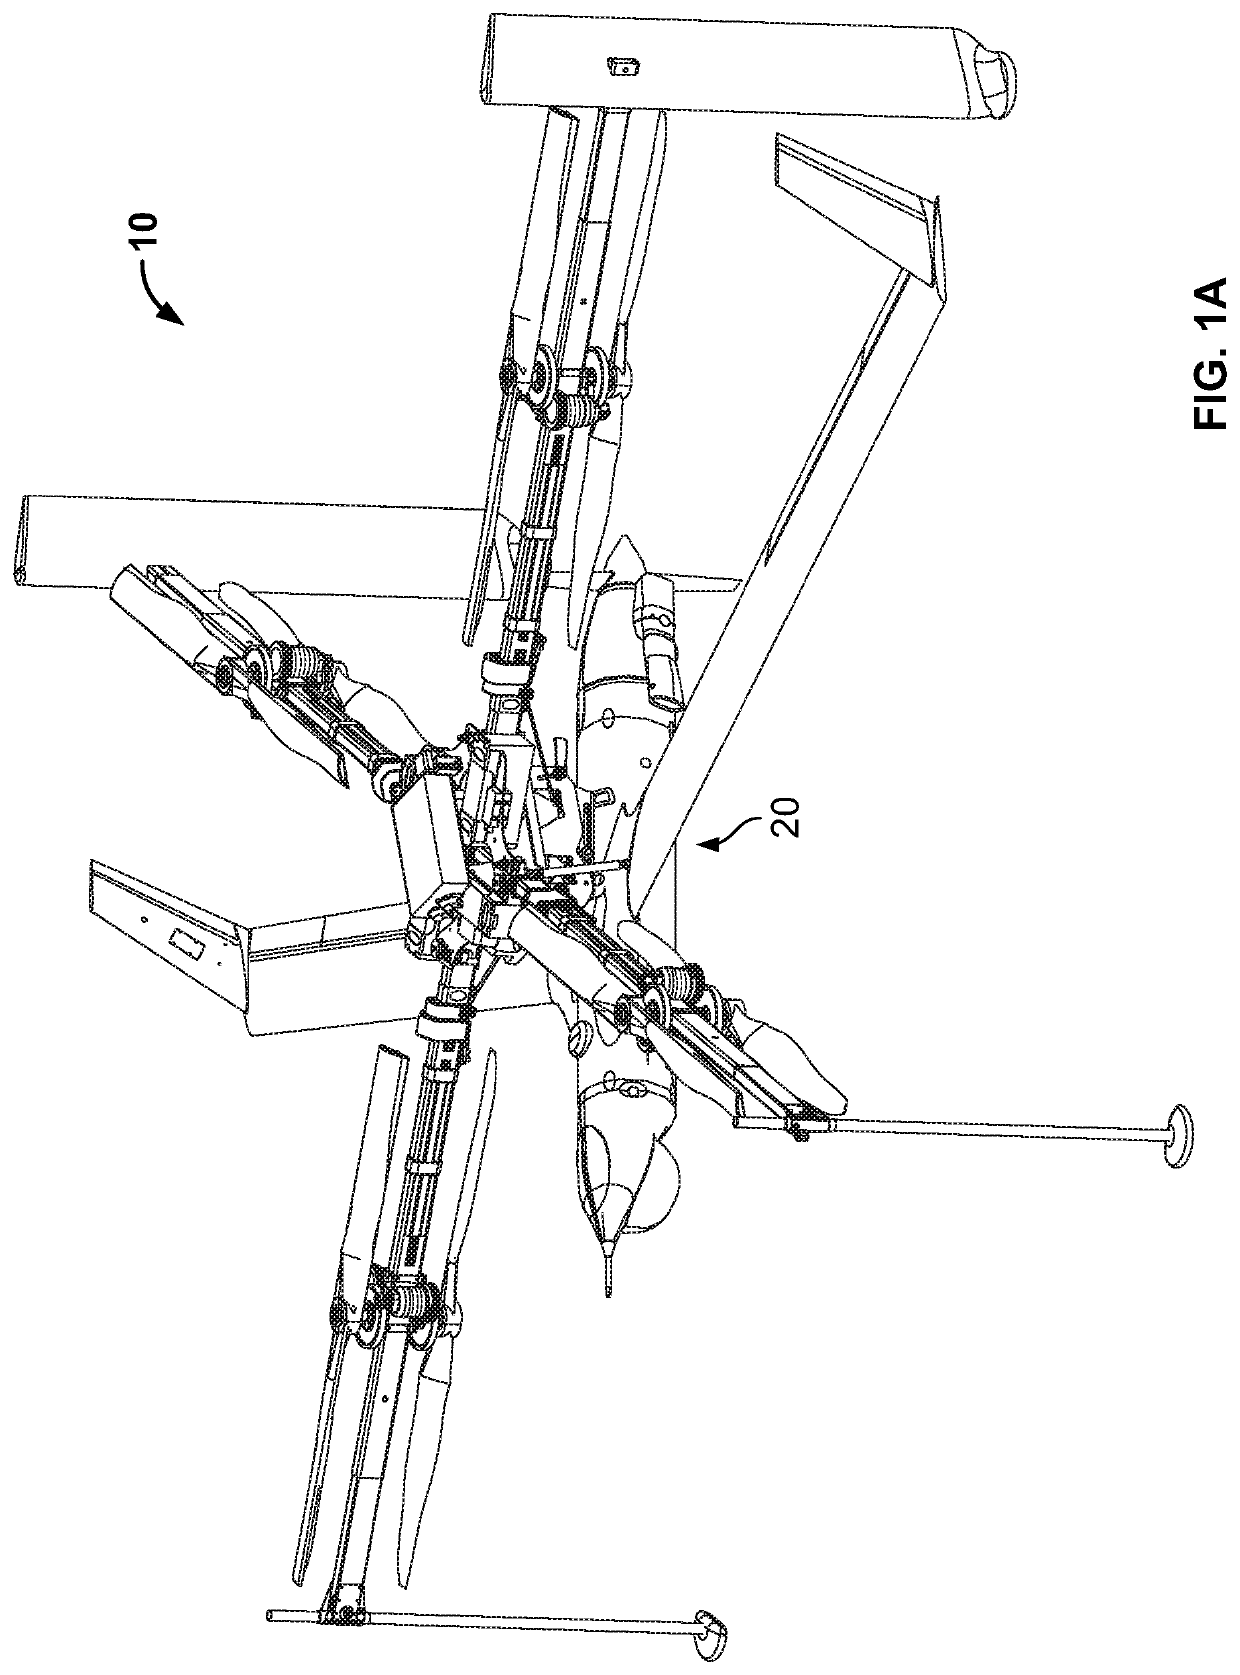 Rotorcraft-assisted systems and methods for launching and retrieving a fixed-wing aircraft into and from free flight